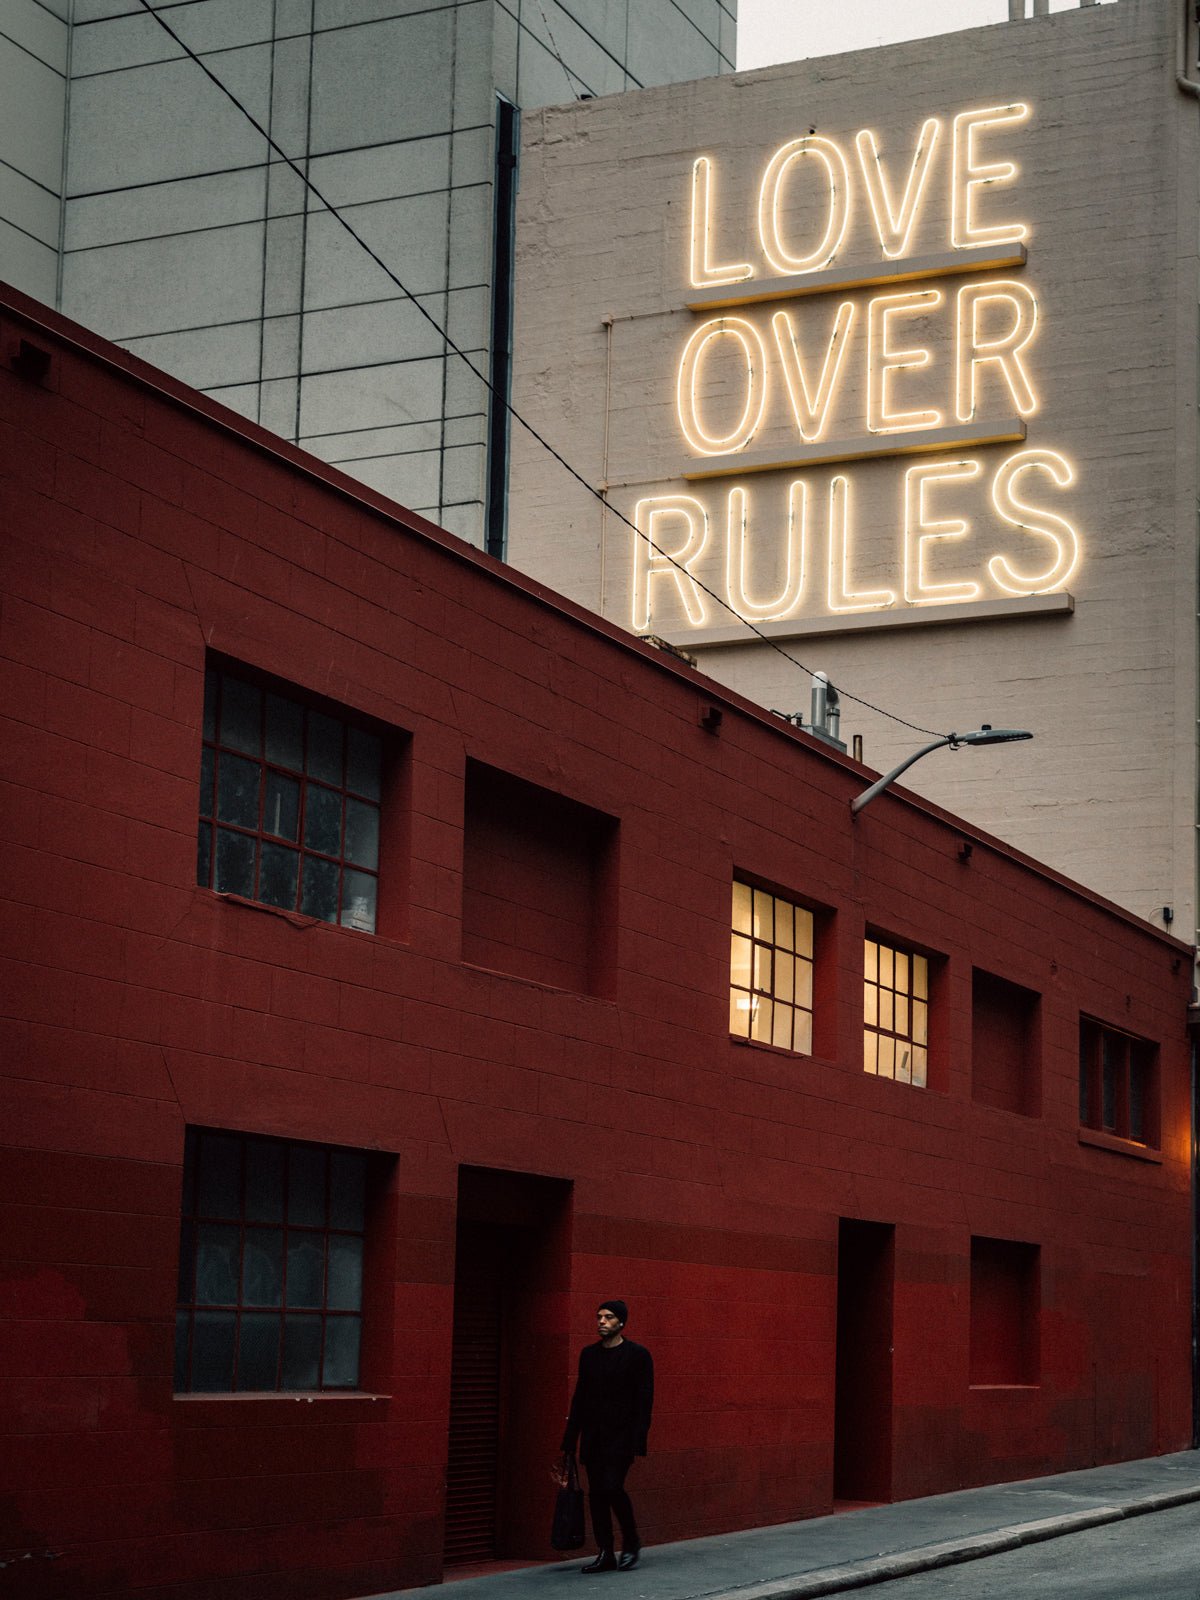 LOVE OVER RULES